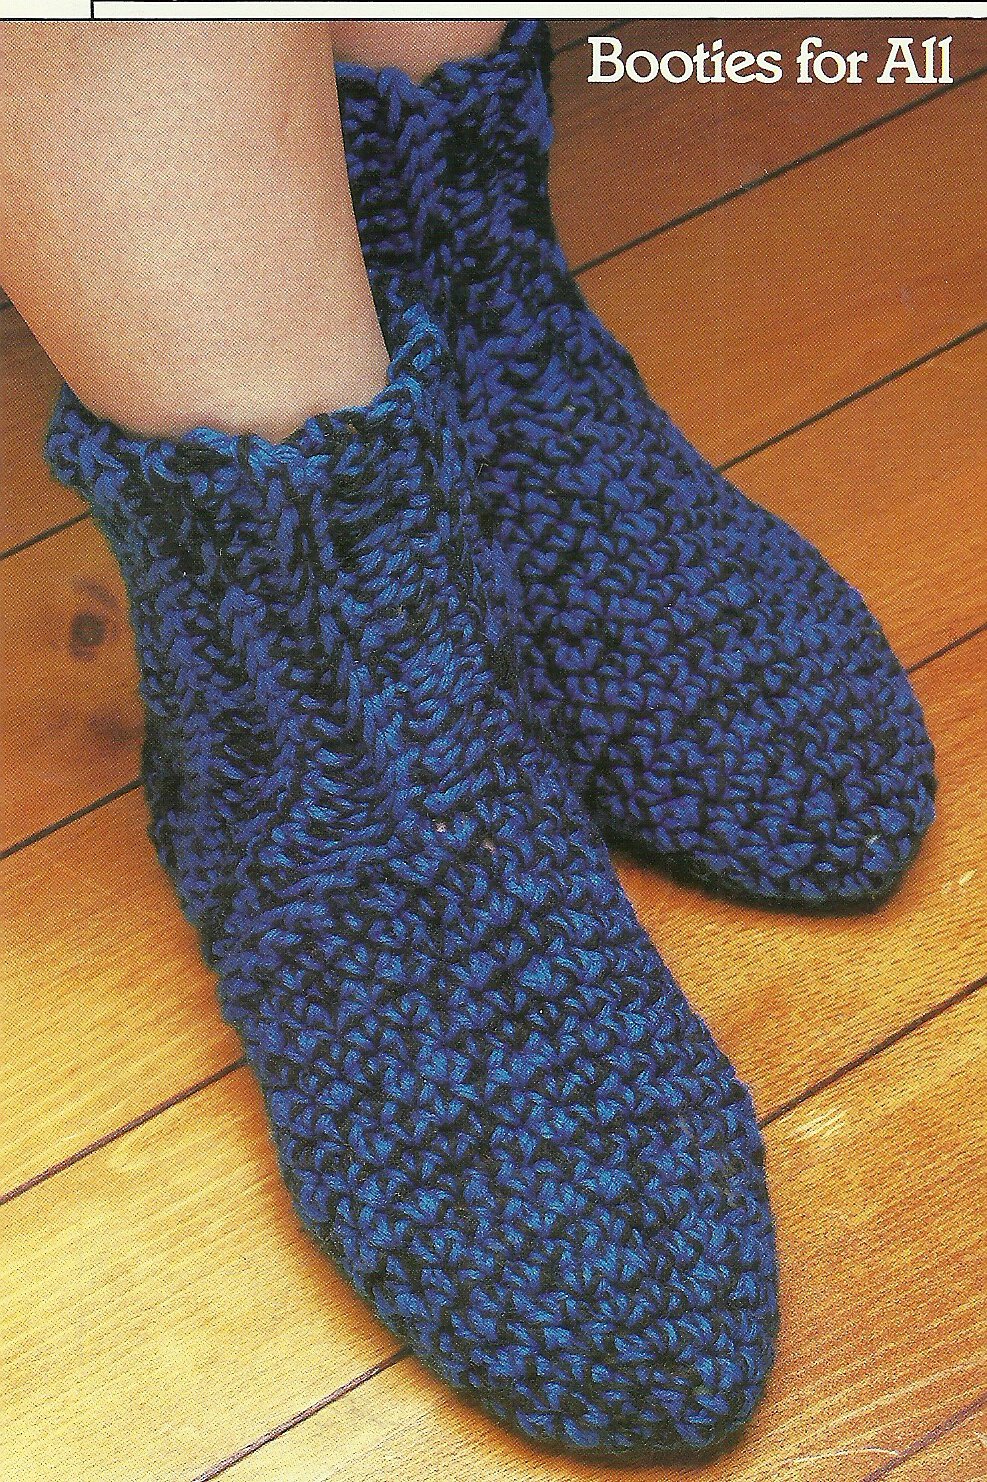 *Annie's Attic Crochet Booties for All - Sleeper for Baby